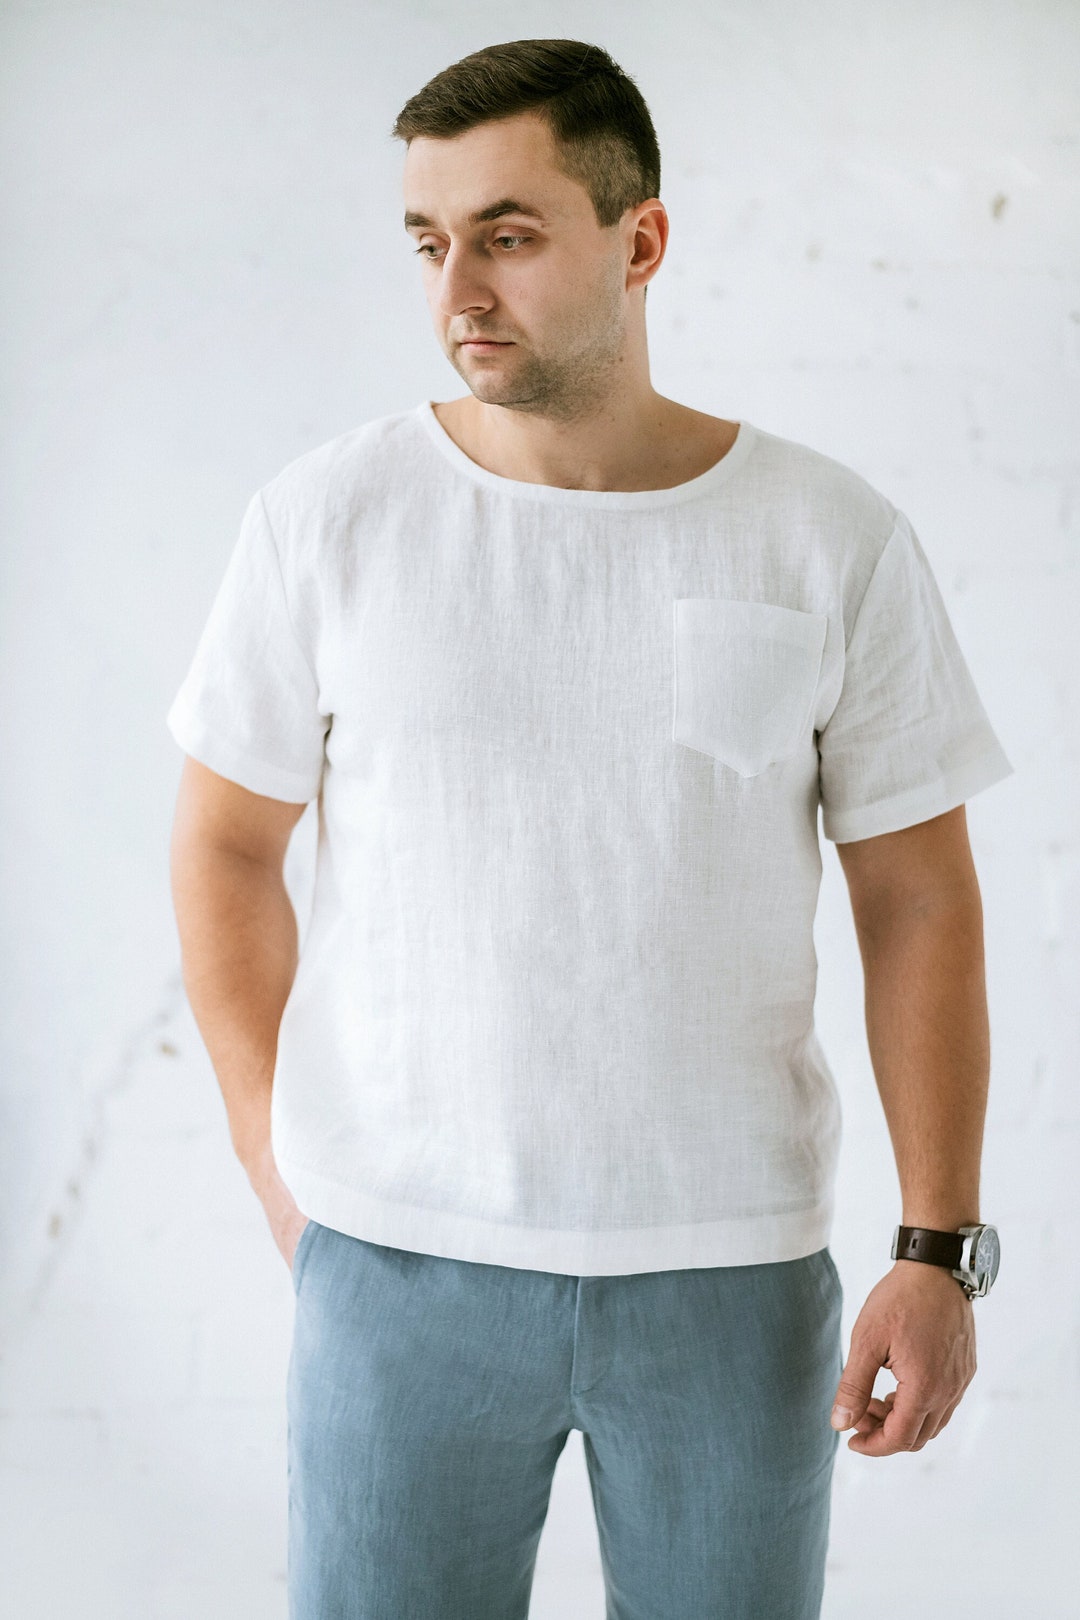 Men's Linen Shirt With Short Sleeves and Pocket on the Chest, White ...